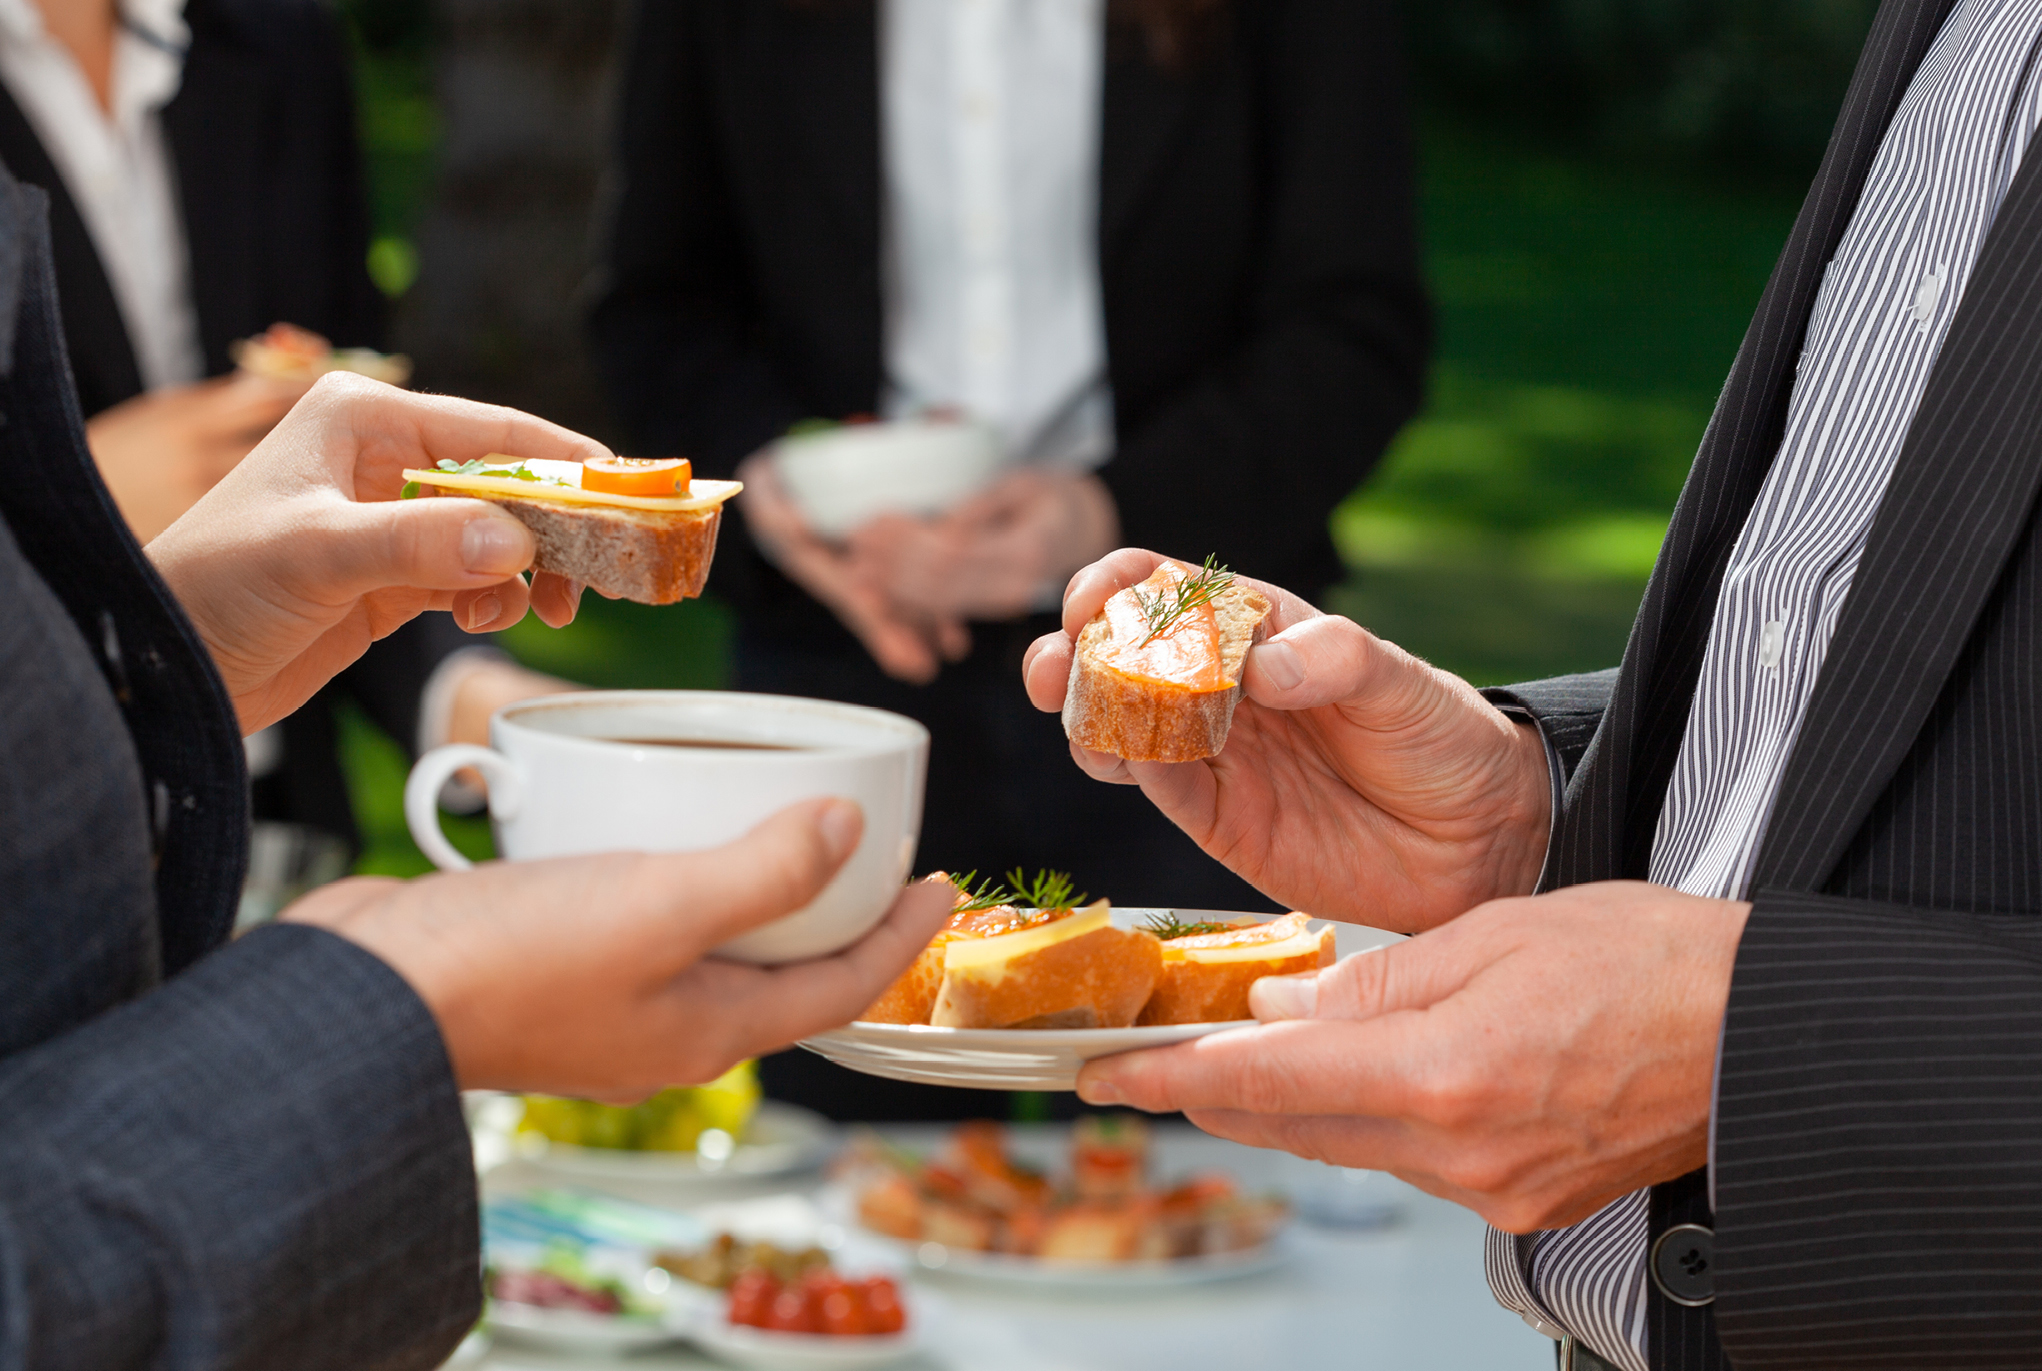 People in business attire holding plates of food and cups of coffee